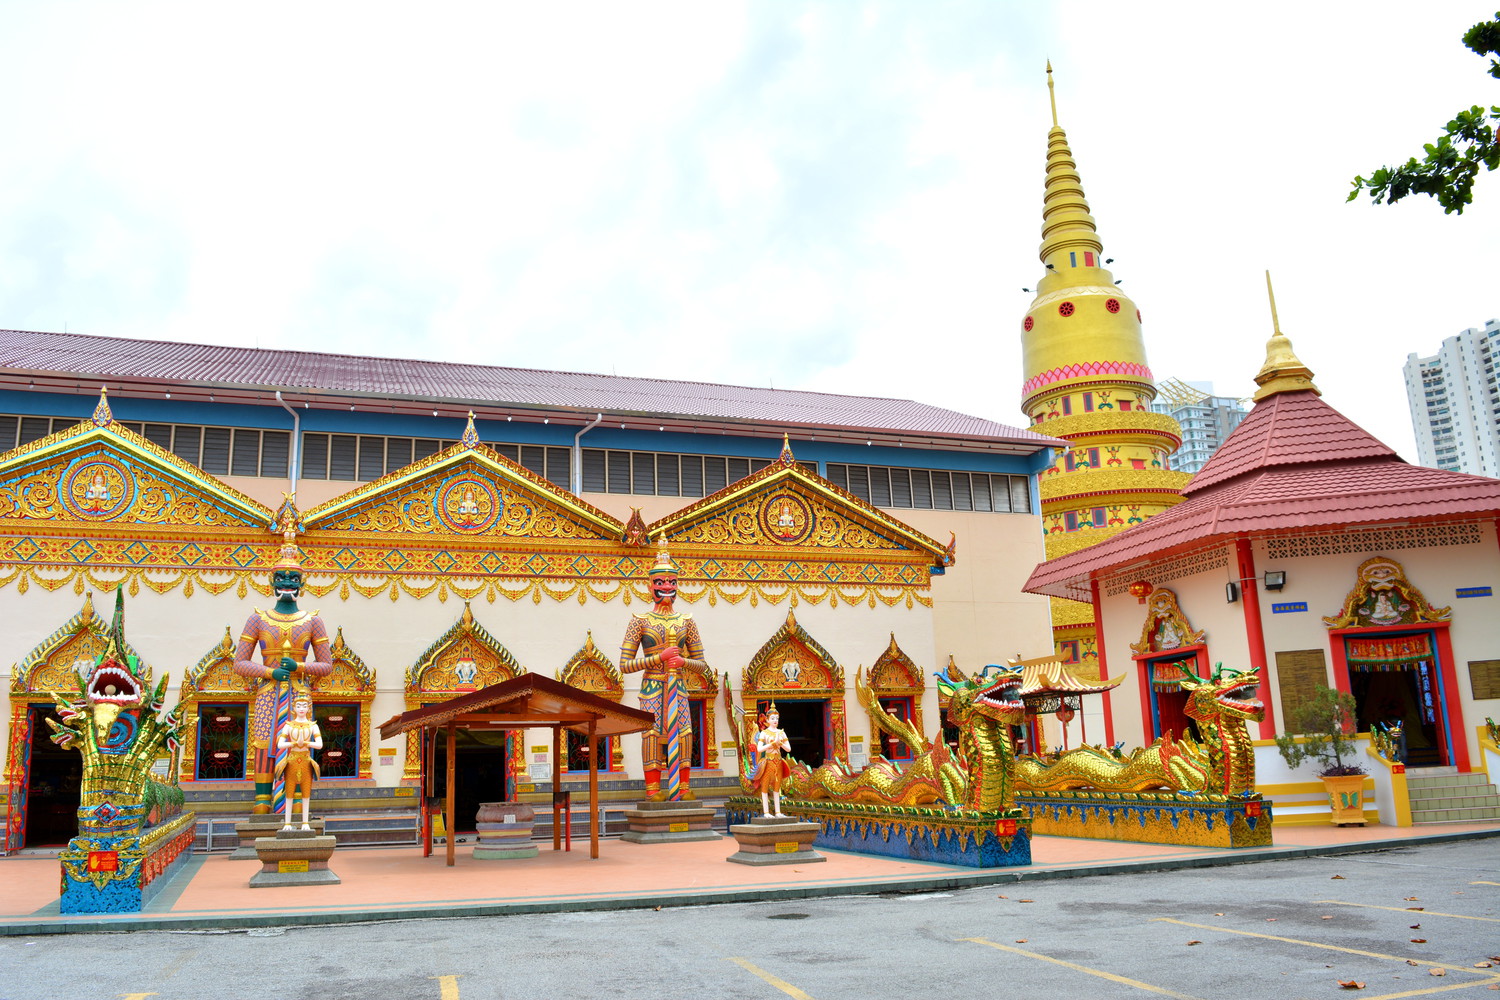 A temple complex with golden spires and statues